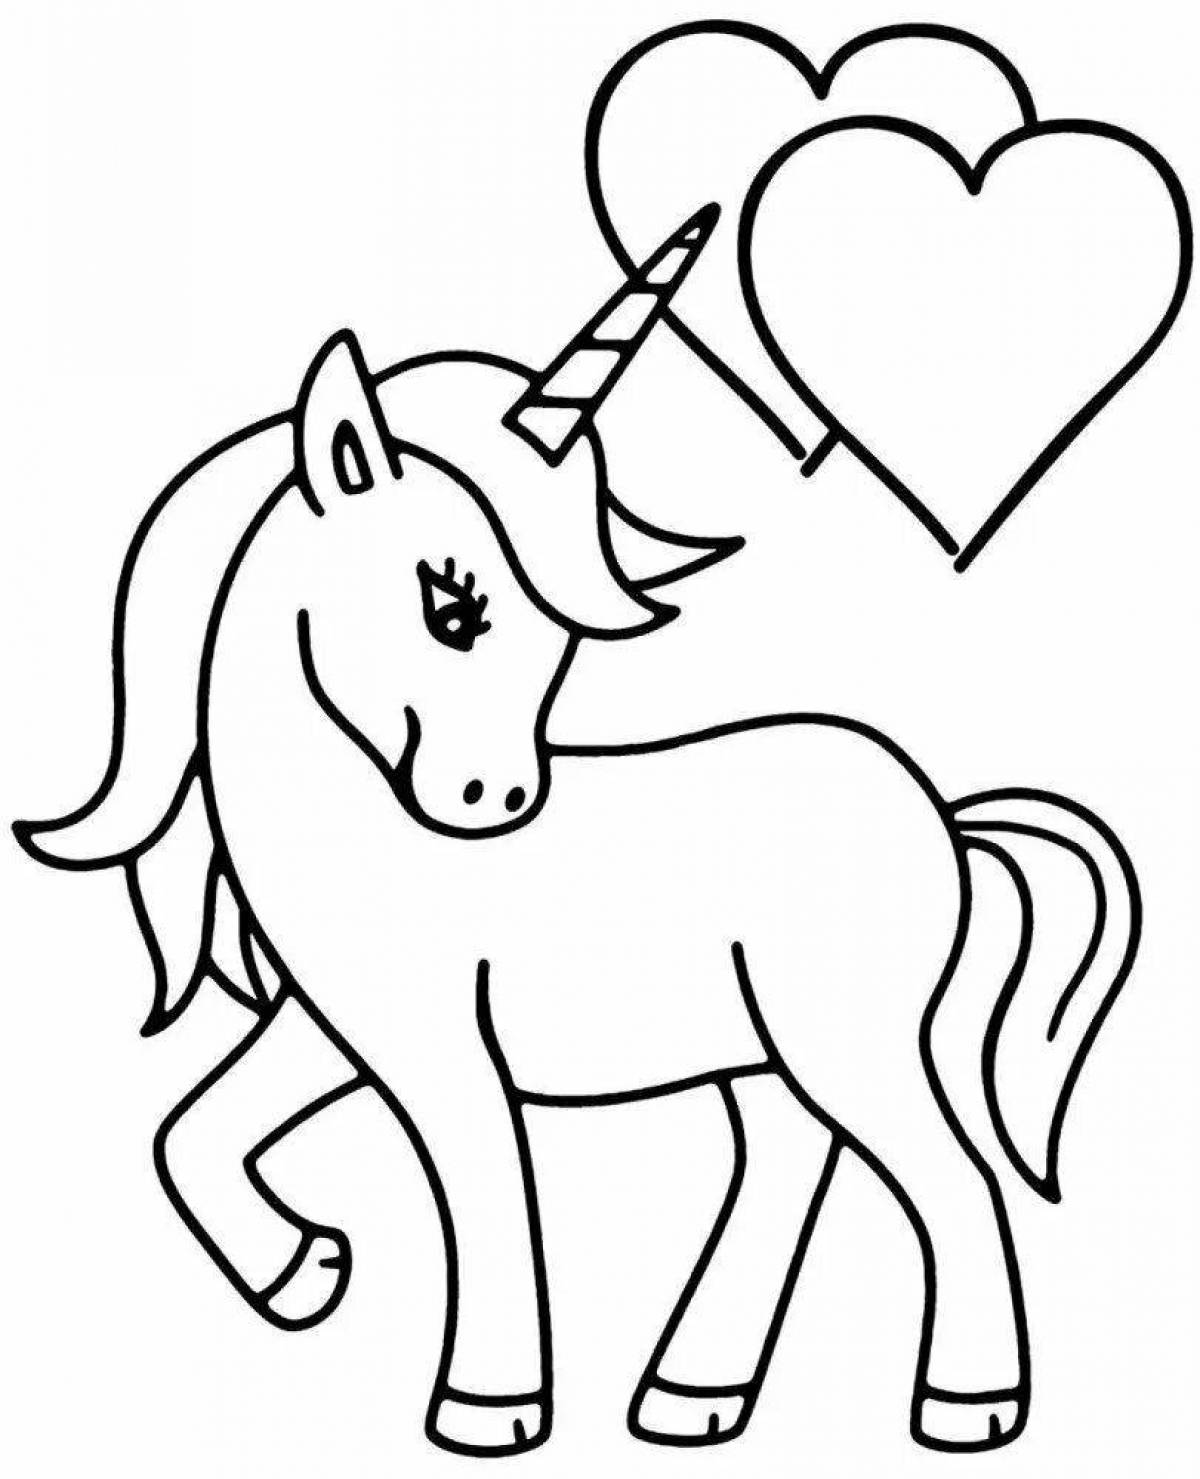 Unicorn drawing for kids #2